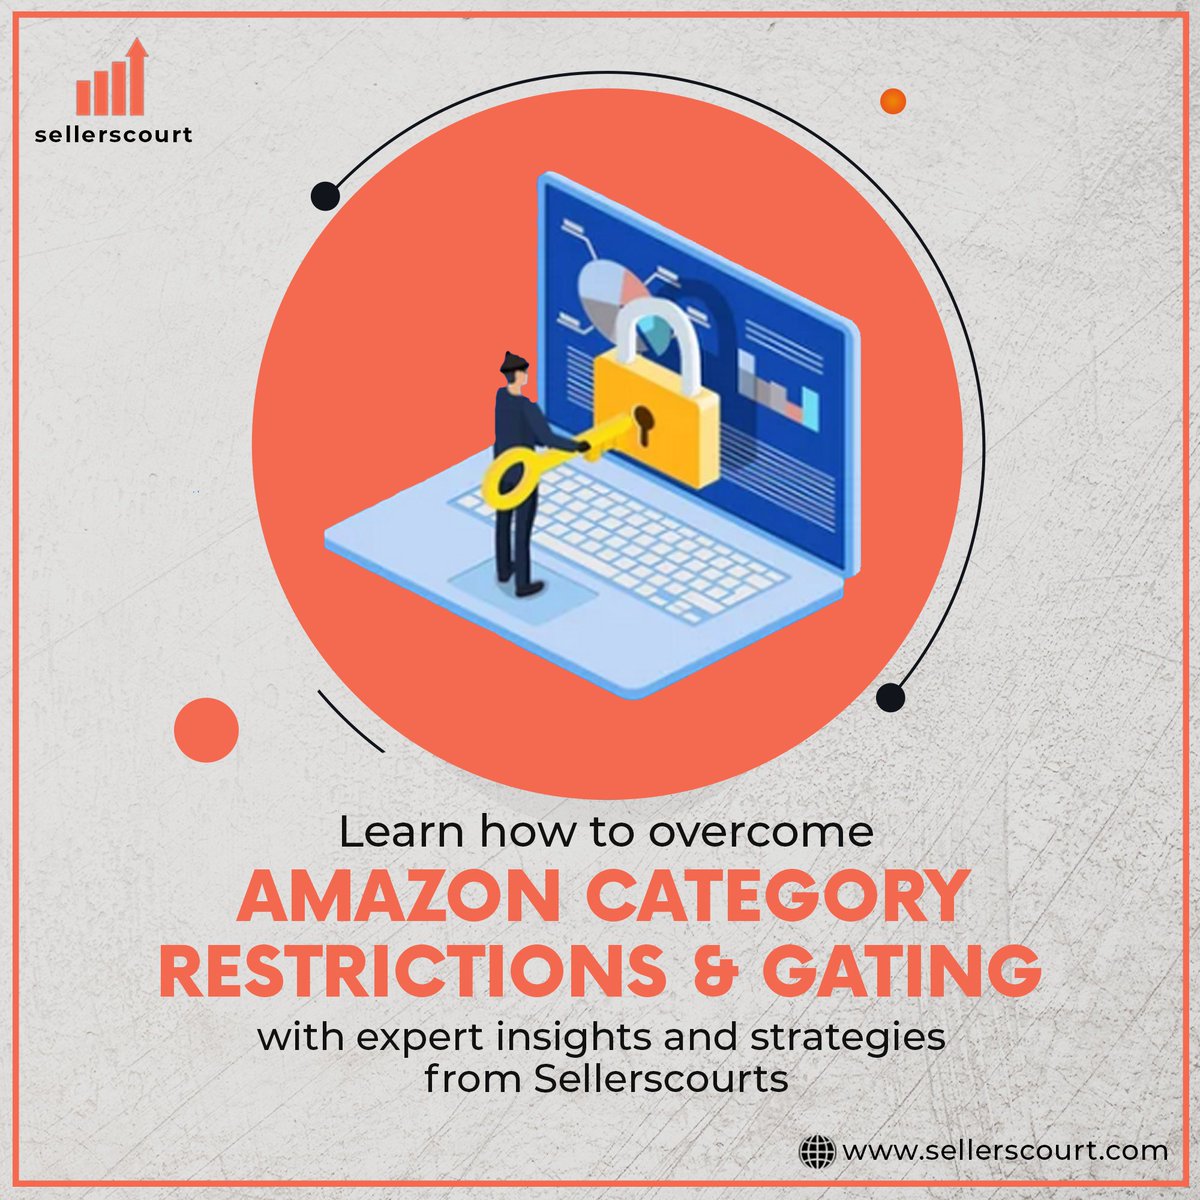 As an Amazon seller, navigating Amazon category restrictions and gating can be a daunting task.
#Sellerscourt #AmazonGating #CategoryRestrictions #AmazonSelling #ApprovalProcess #AmazonSellers #NavigatingAmazon #SellersCourts #AmazonAgency